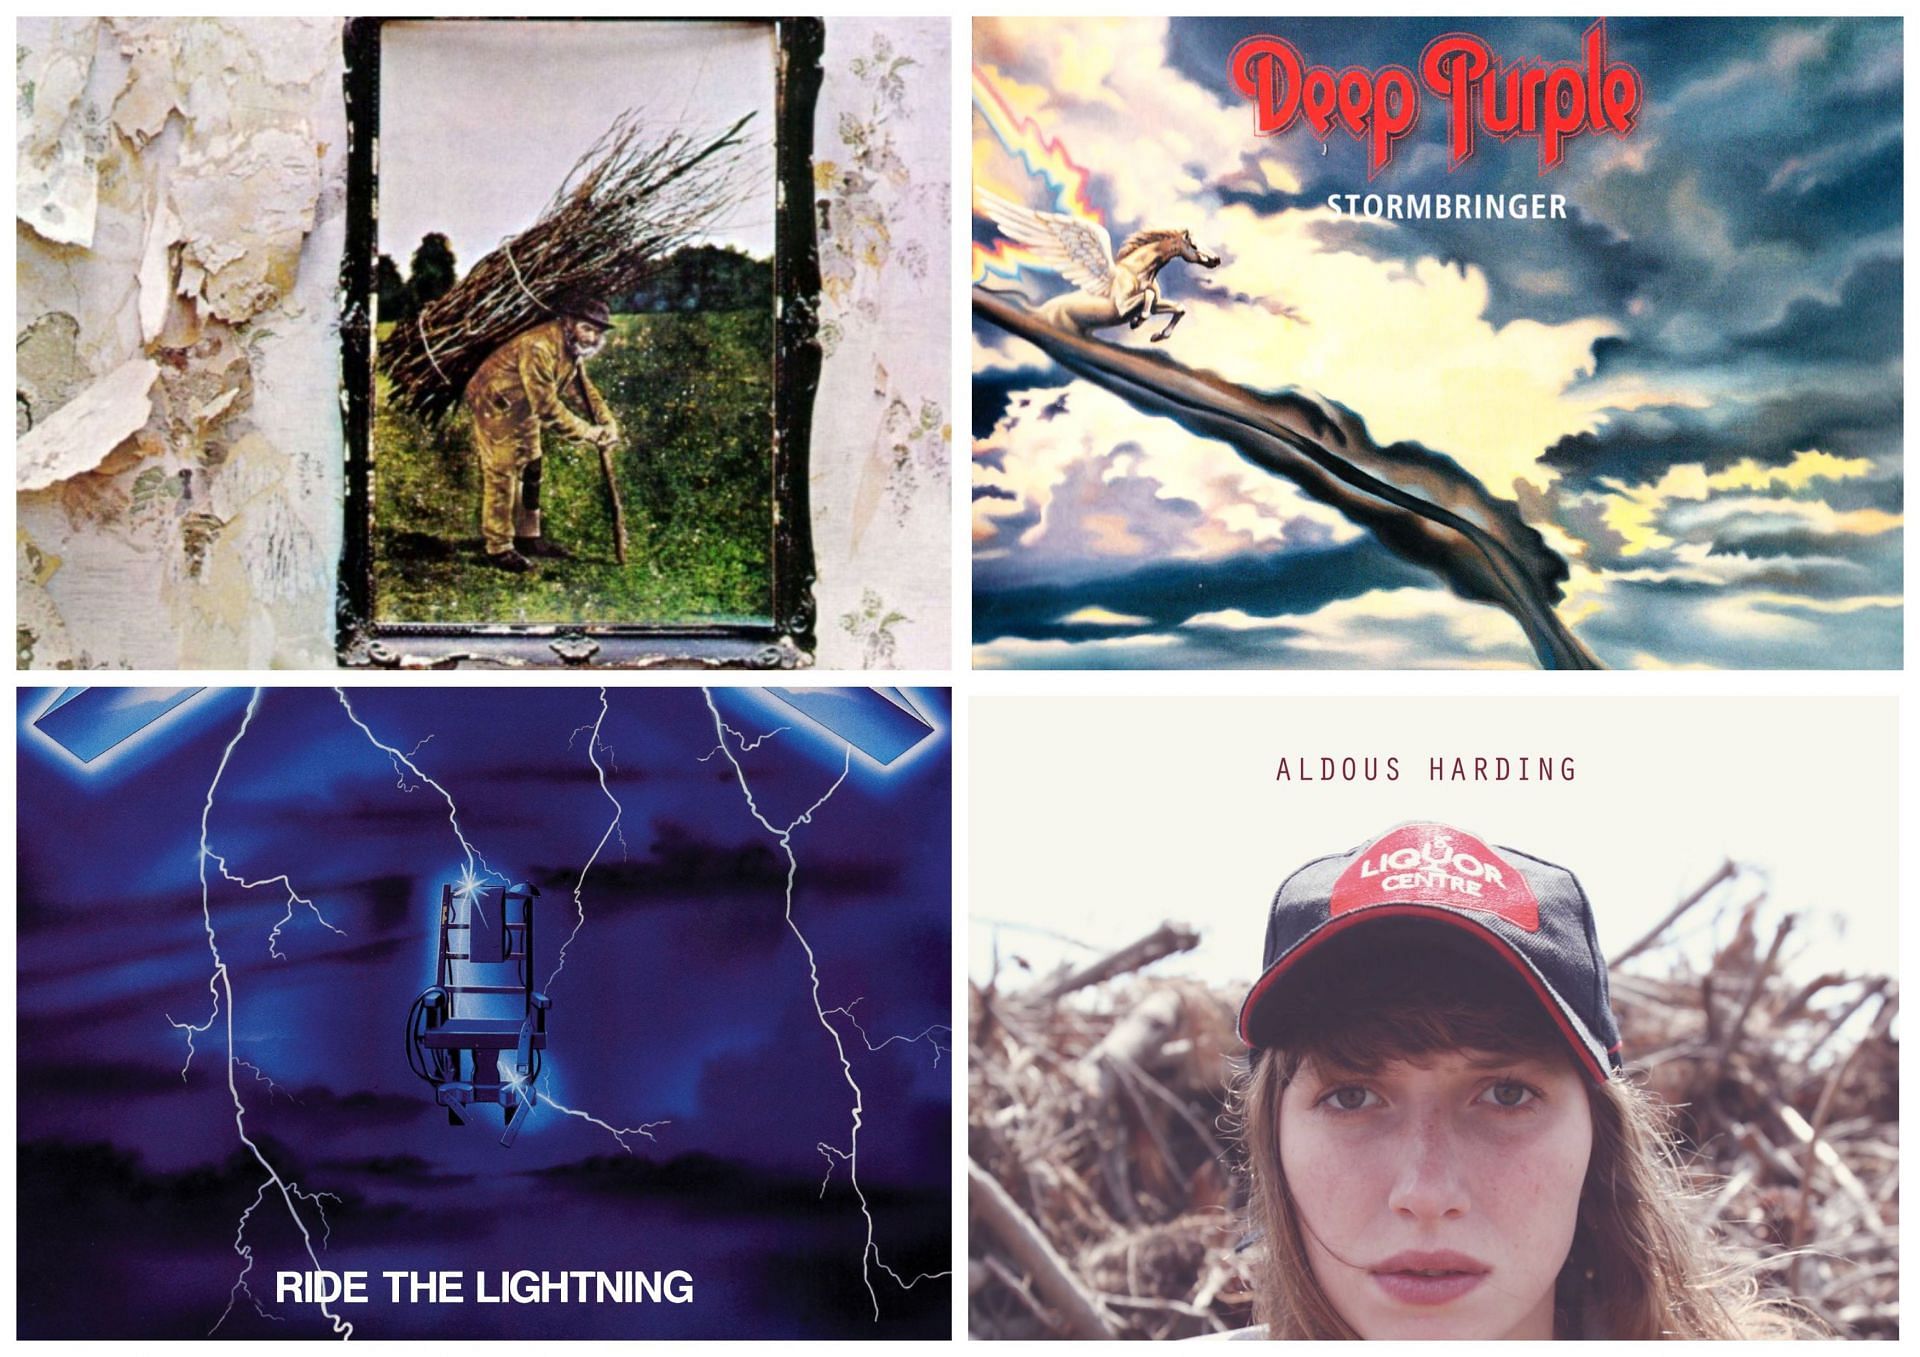 The album covers for &quot;Call of Ktulu&quot; by Metallica, &quot;Titus Groan&quot; by Aldous Harding, &quot;Stormbringer&quot; by Deep Purple and &quot;The Battle of Evermore&quot; by Led Zeppelin (Images via official website @Metallica and @Deep Purple and official Facebook page @Aldous Harding and @Led Zeppelin)